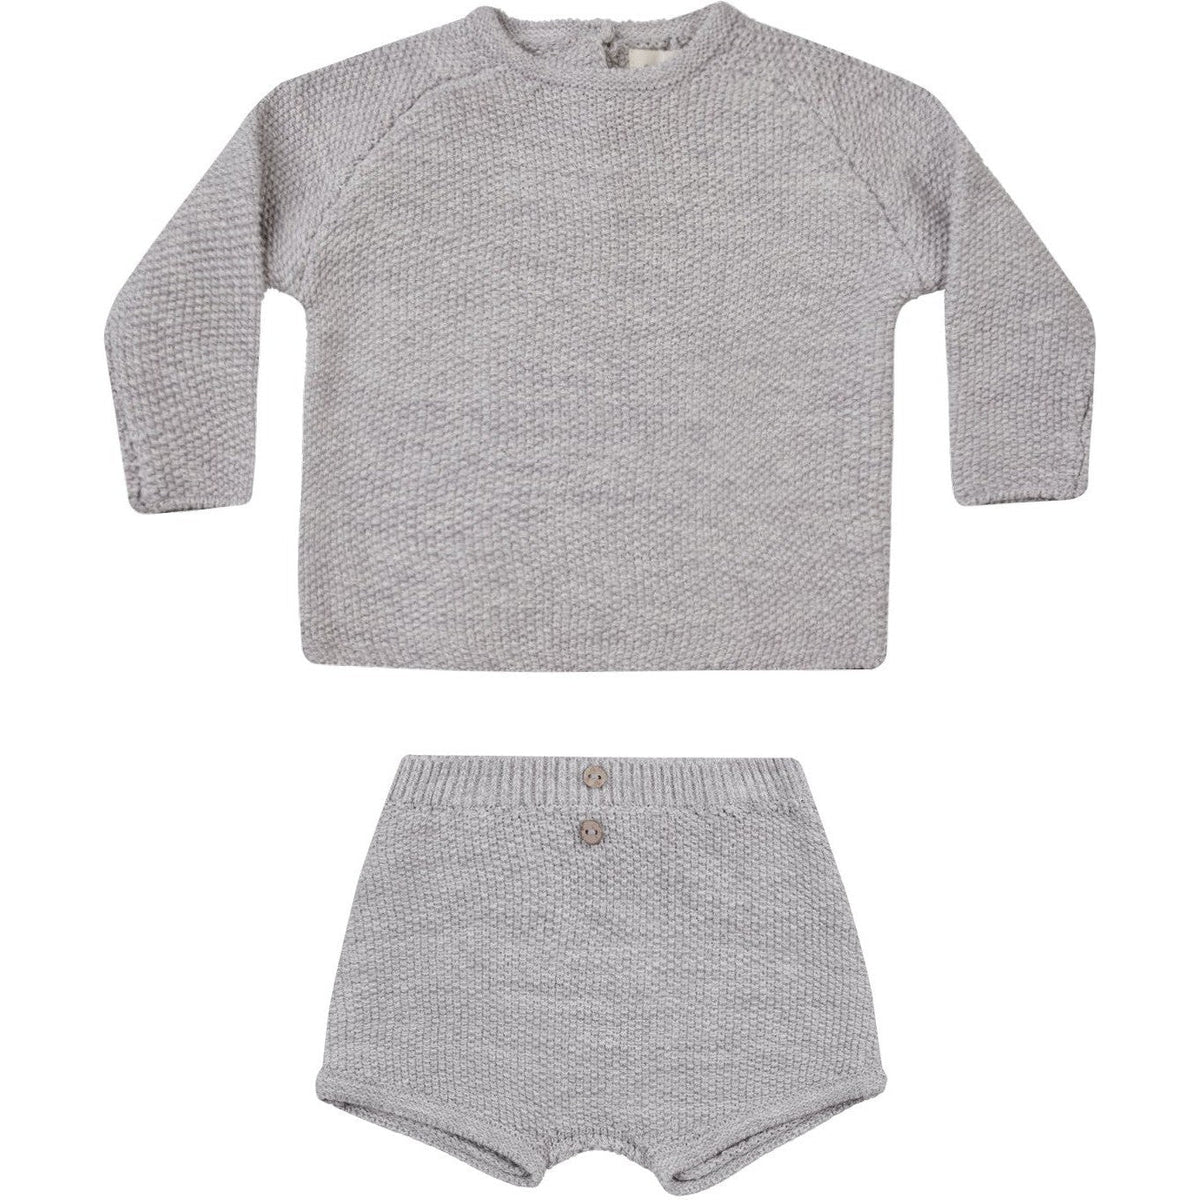 Quincy Mae Summer Knit Set | Heathered Periwinkle